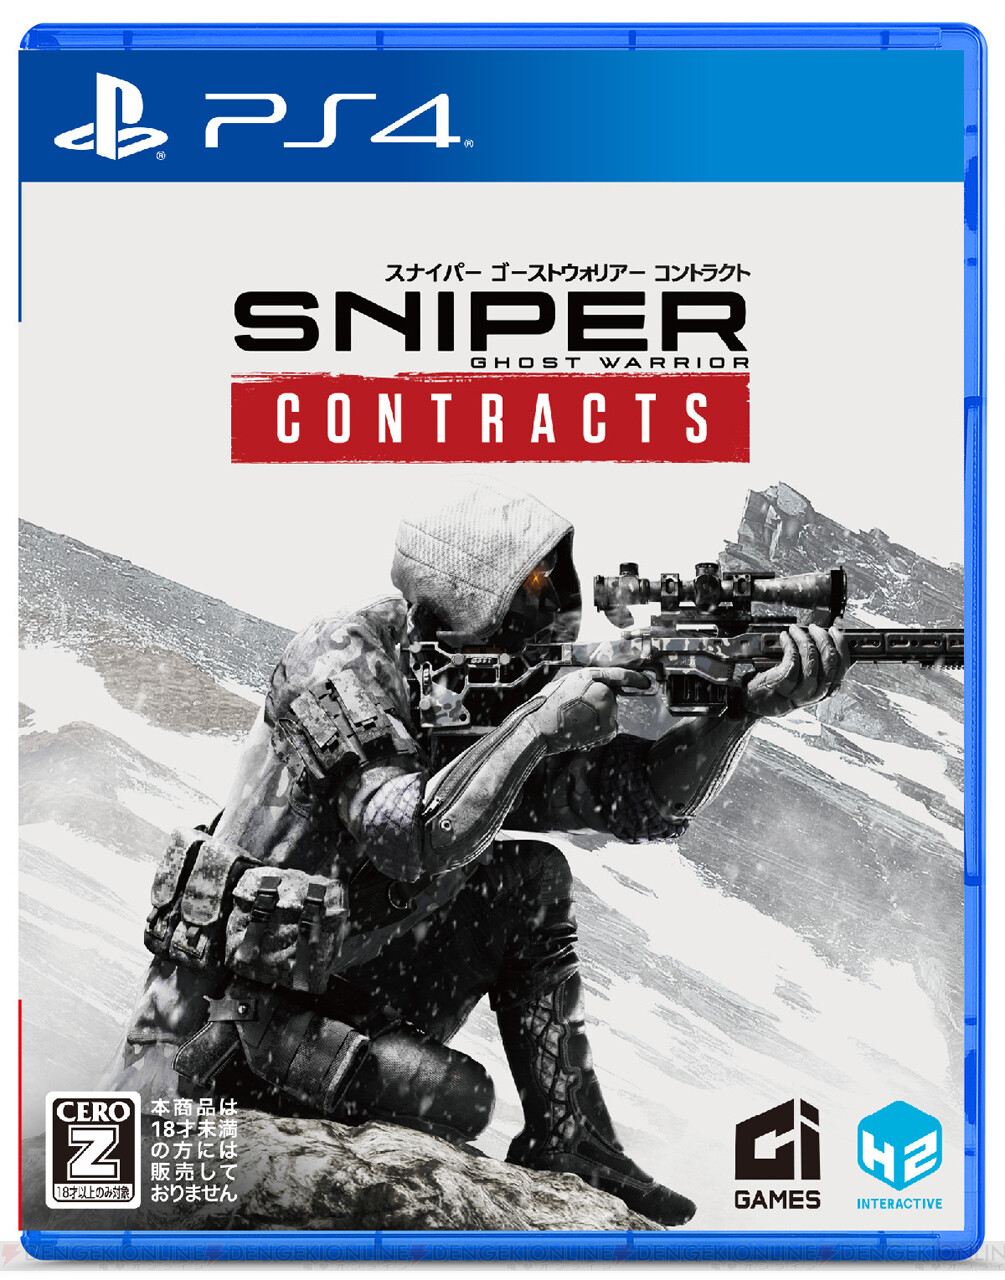 Sniper Ghost Warrior Contracts 発売日が変更 電撃オンライン